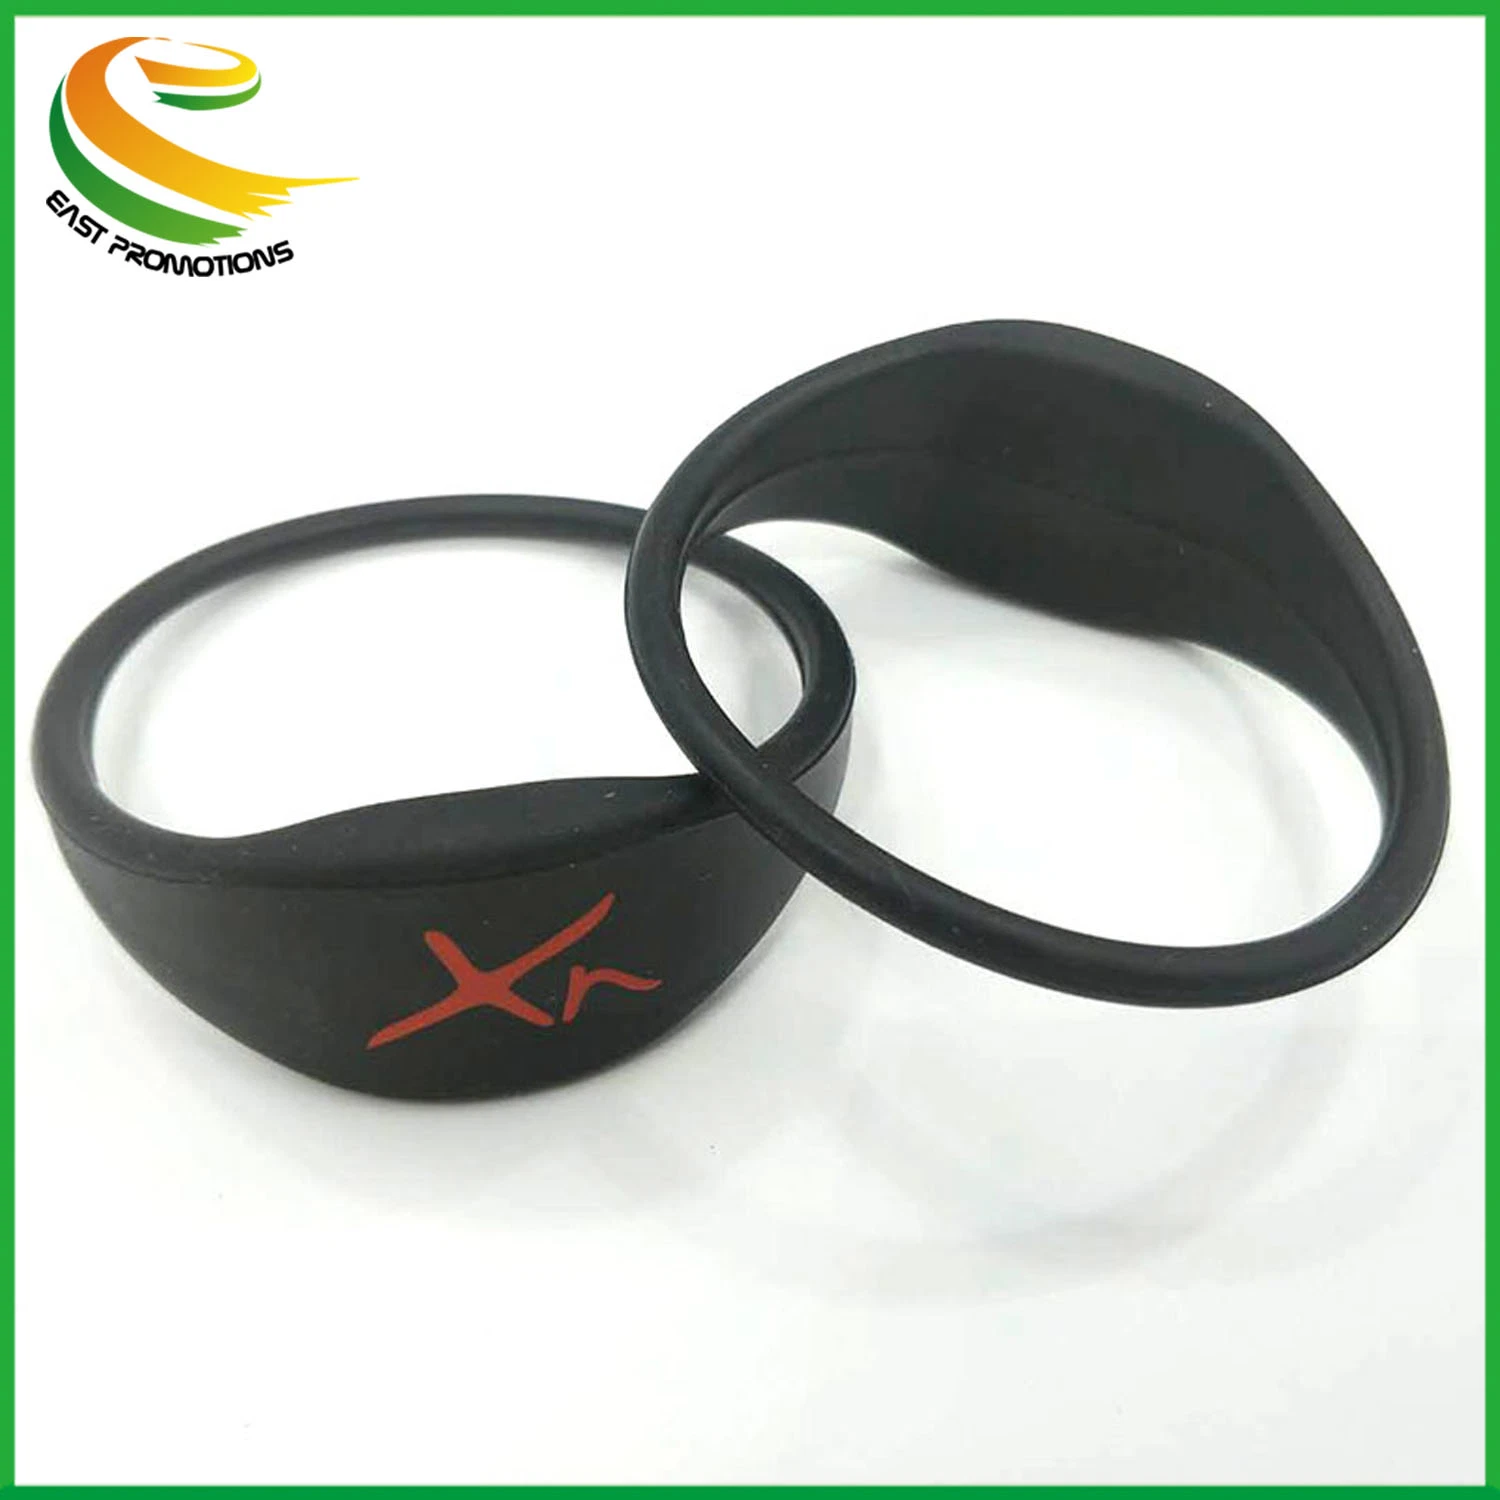 Customized Waterproof 13.56MHz NFC Silicone Hf RFID Wristband Smart Bracelet for Access Control